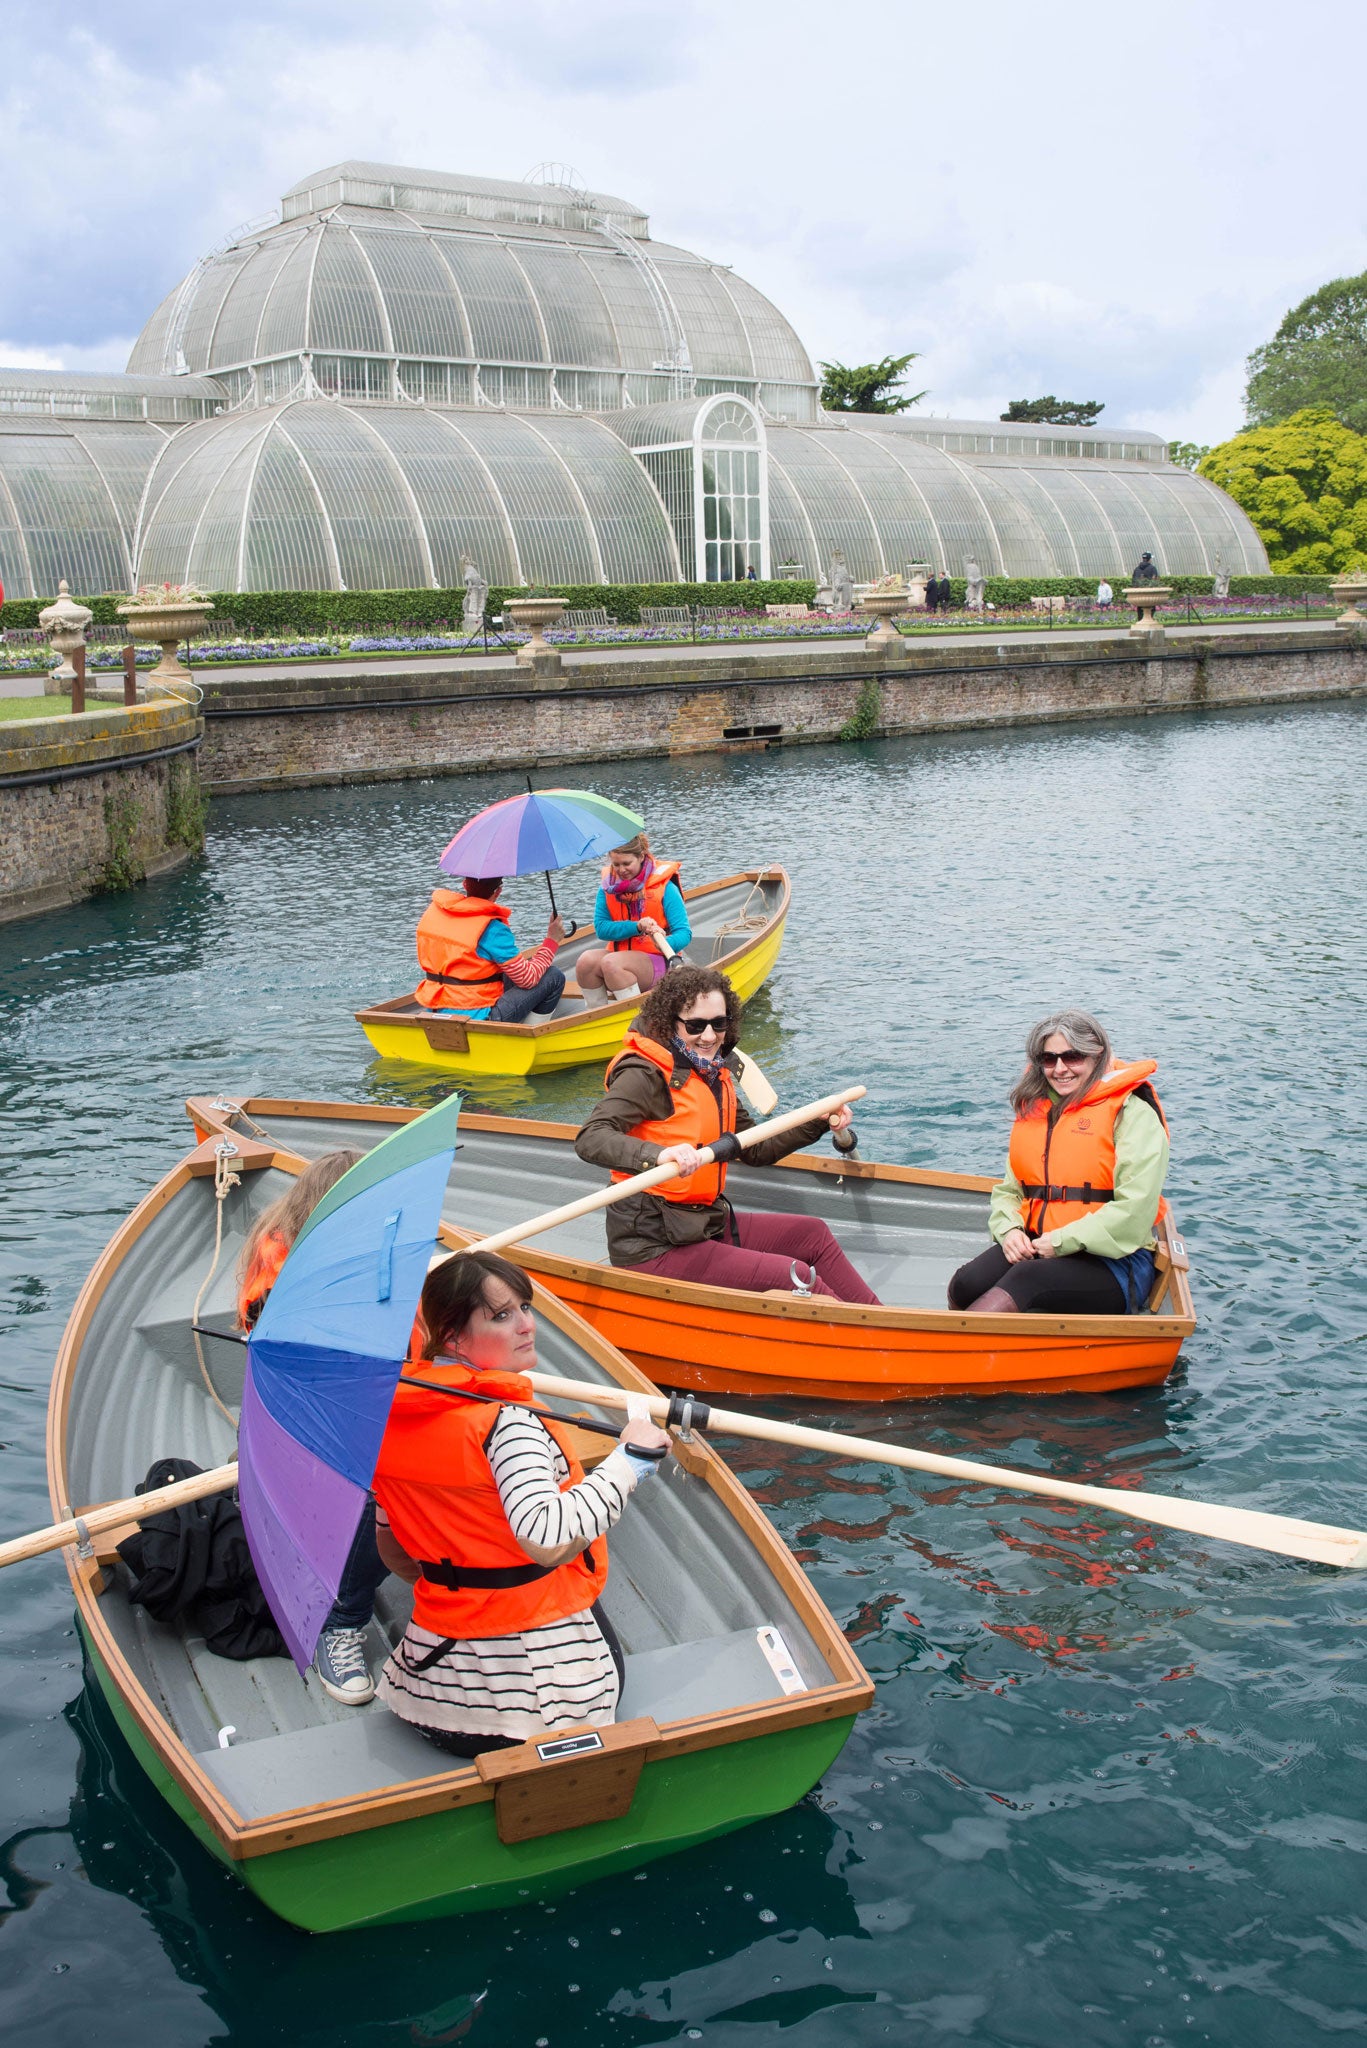 Go boating on a Tutti Frutti lake at the gardens in Kew